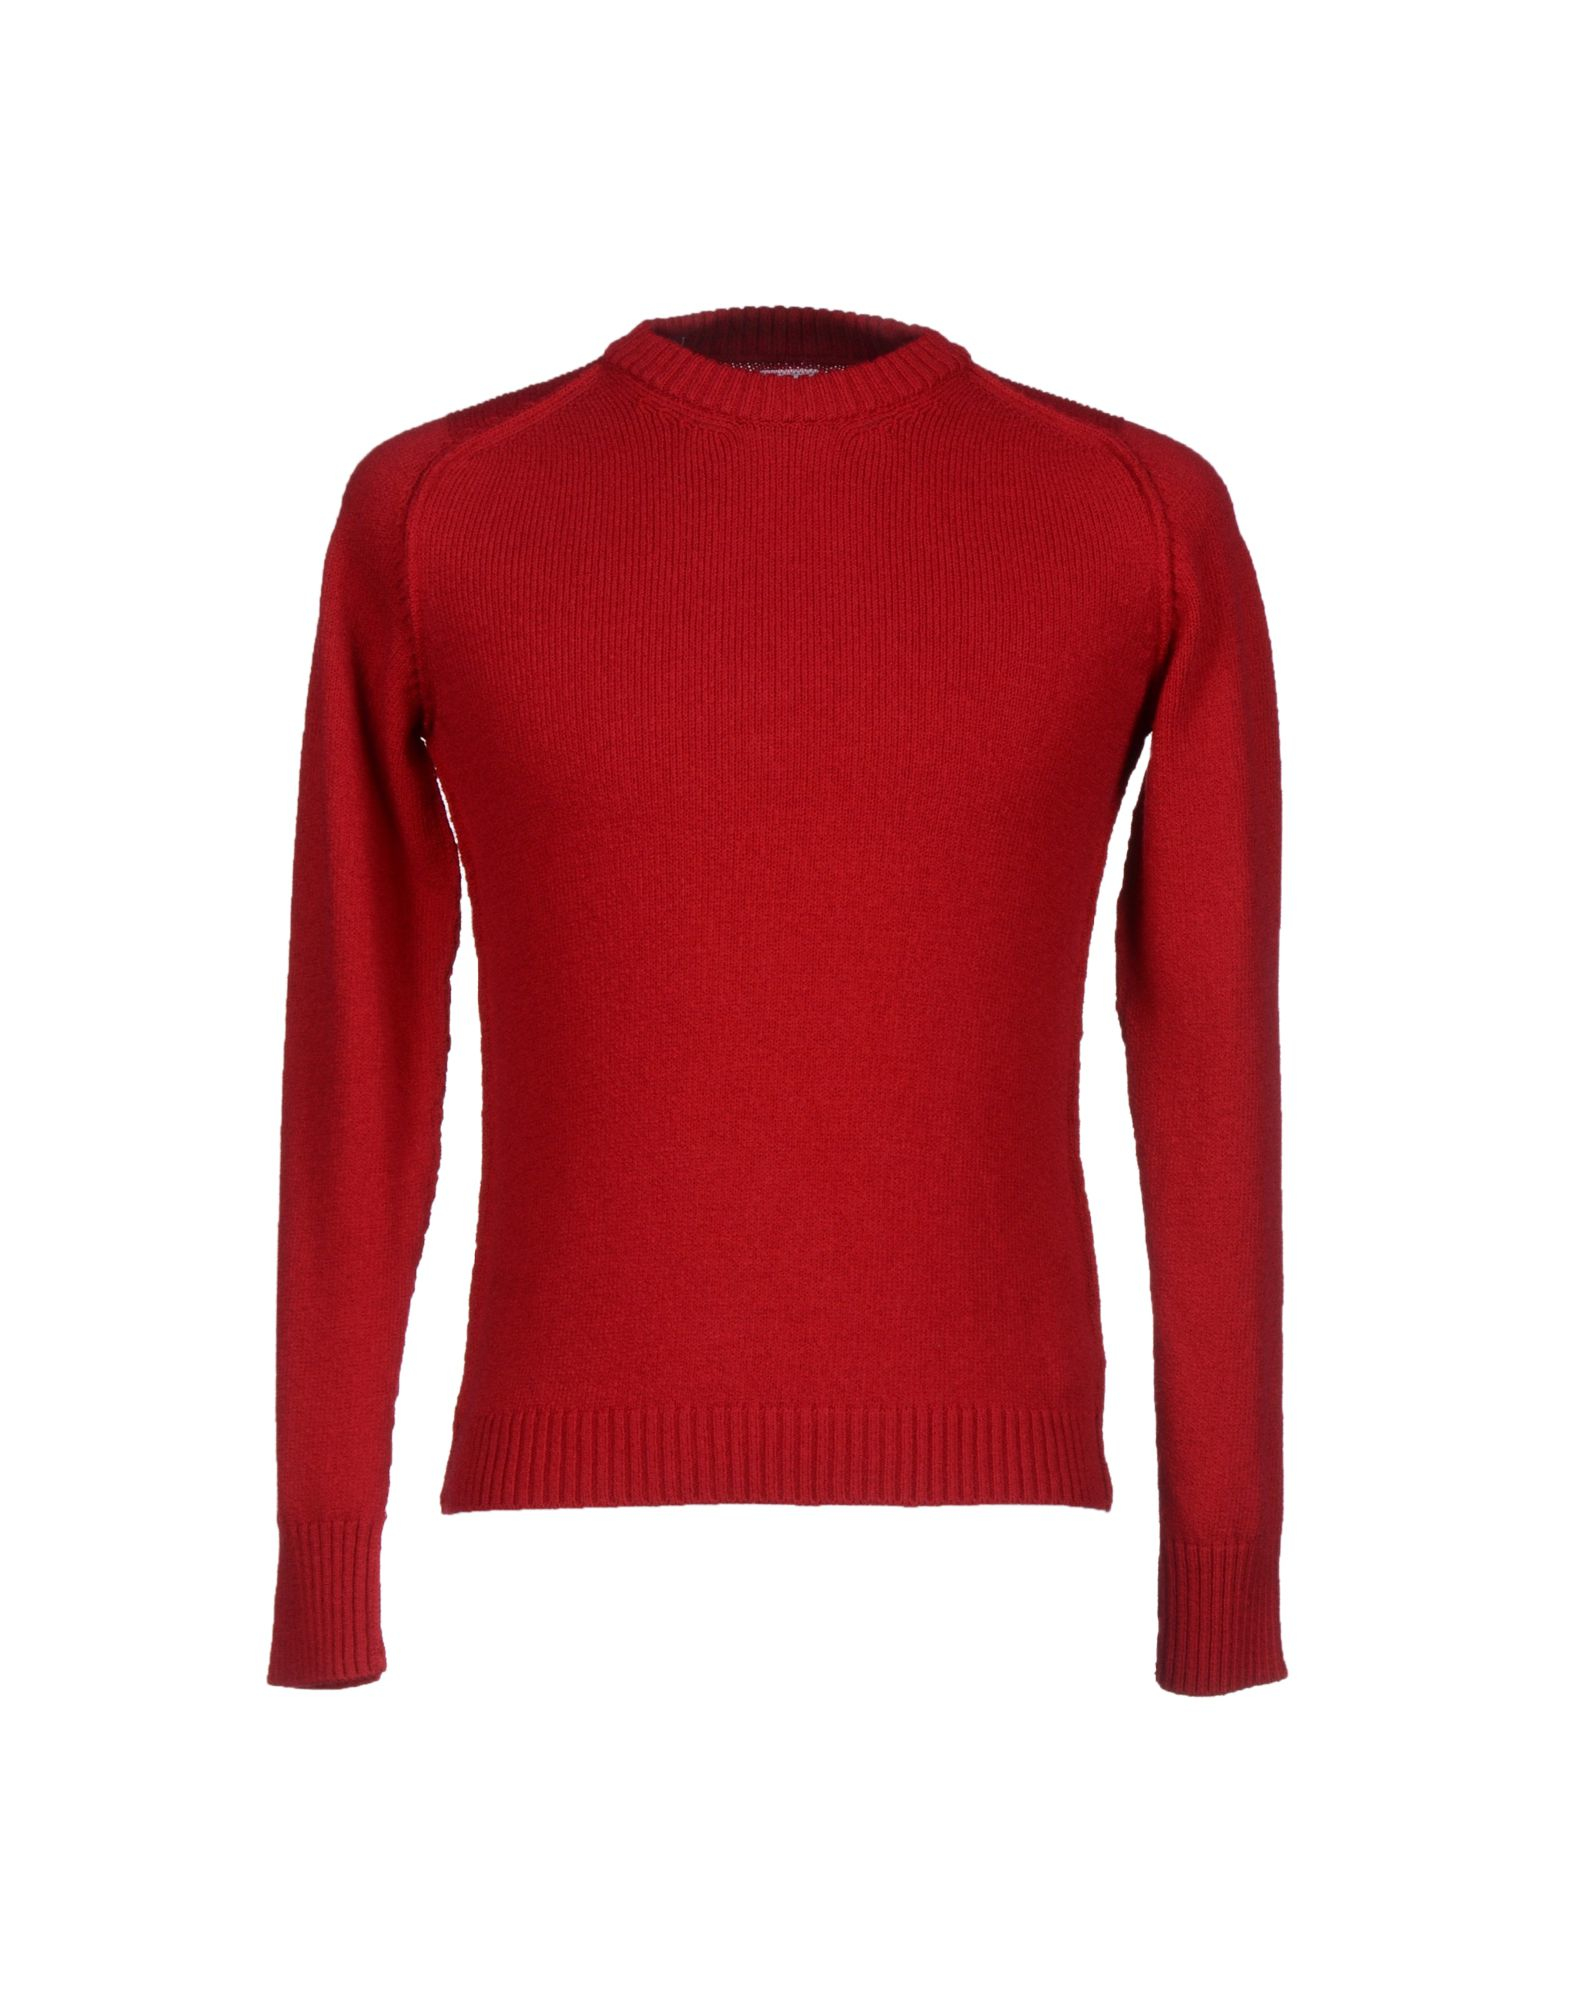 C p company Jumper in Red for Men | Lyst